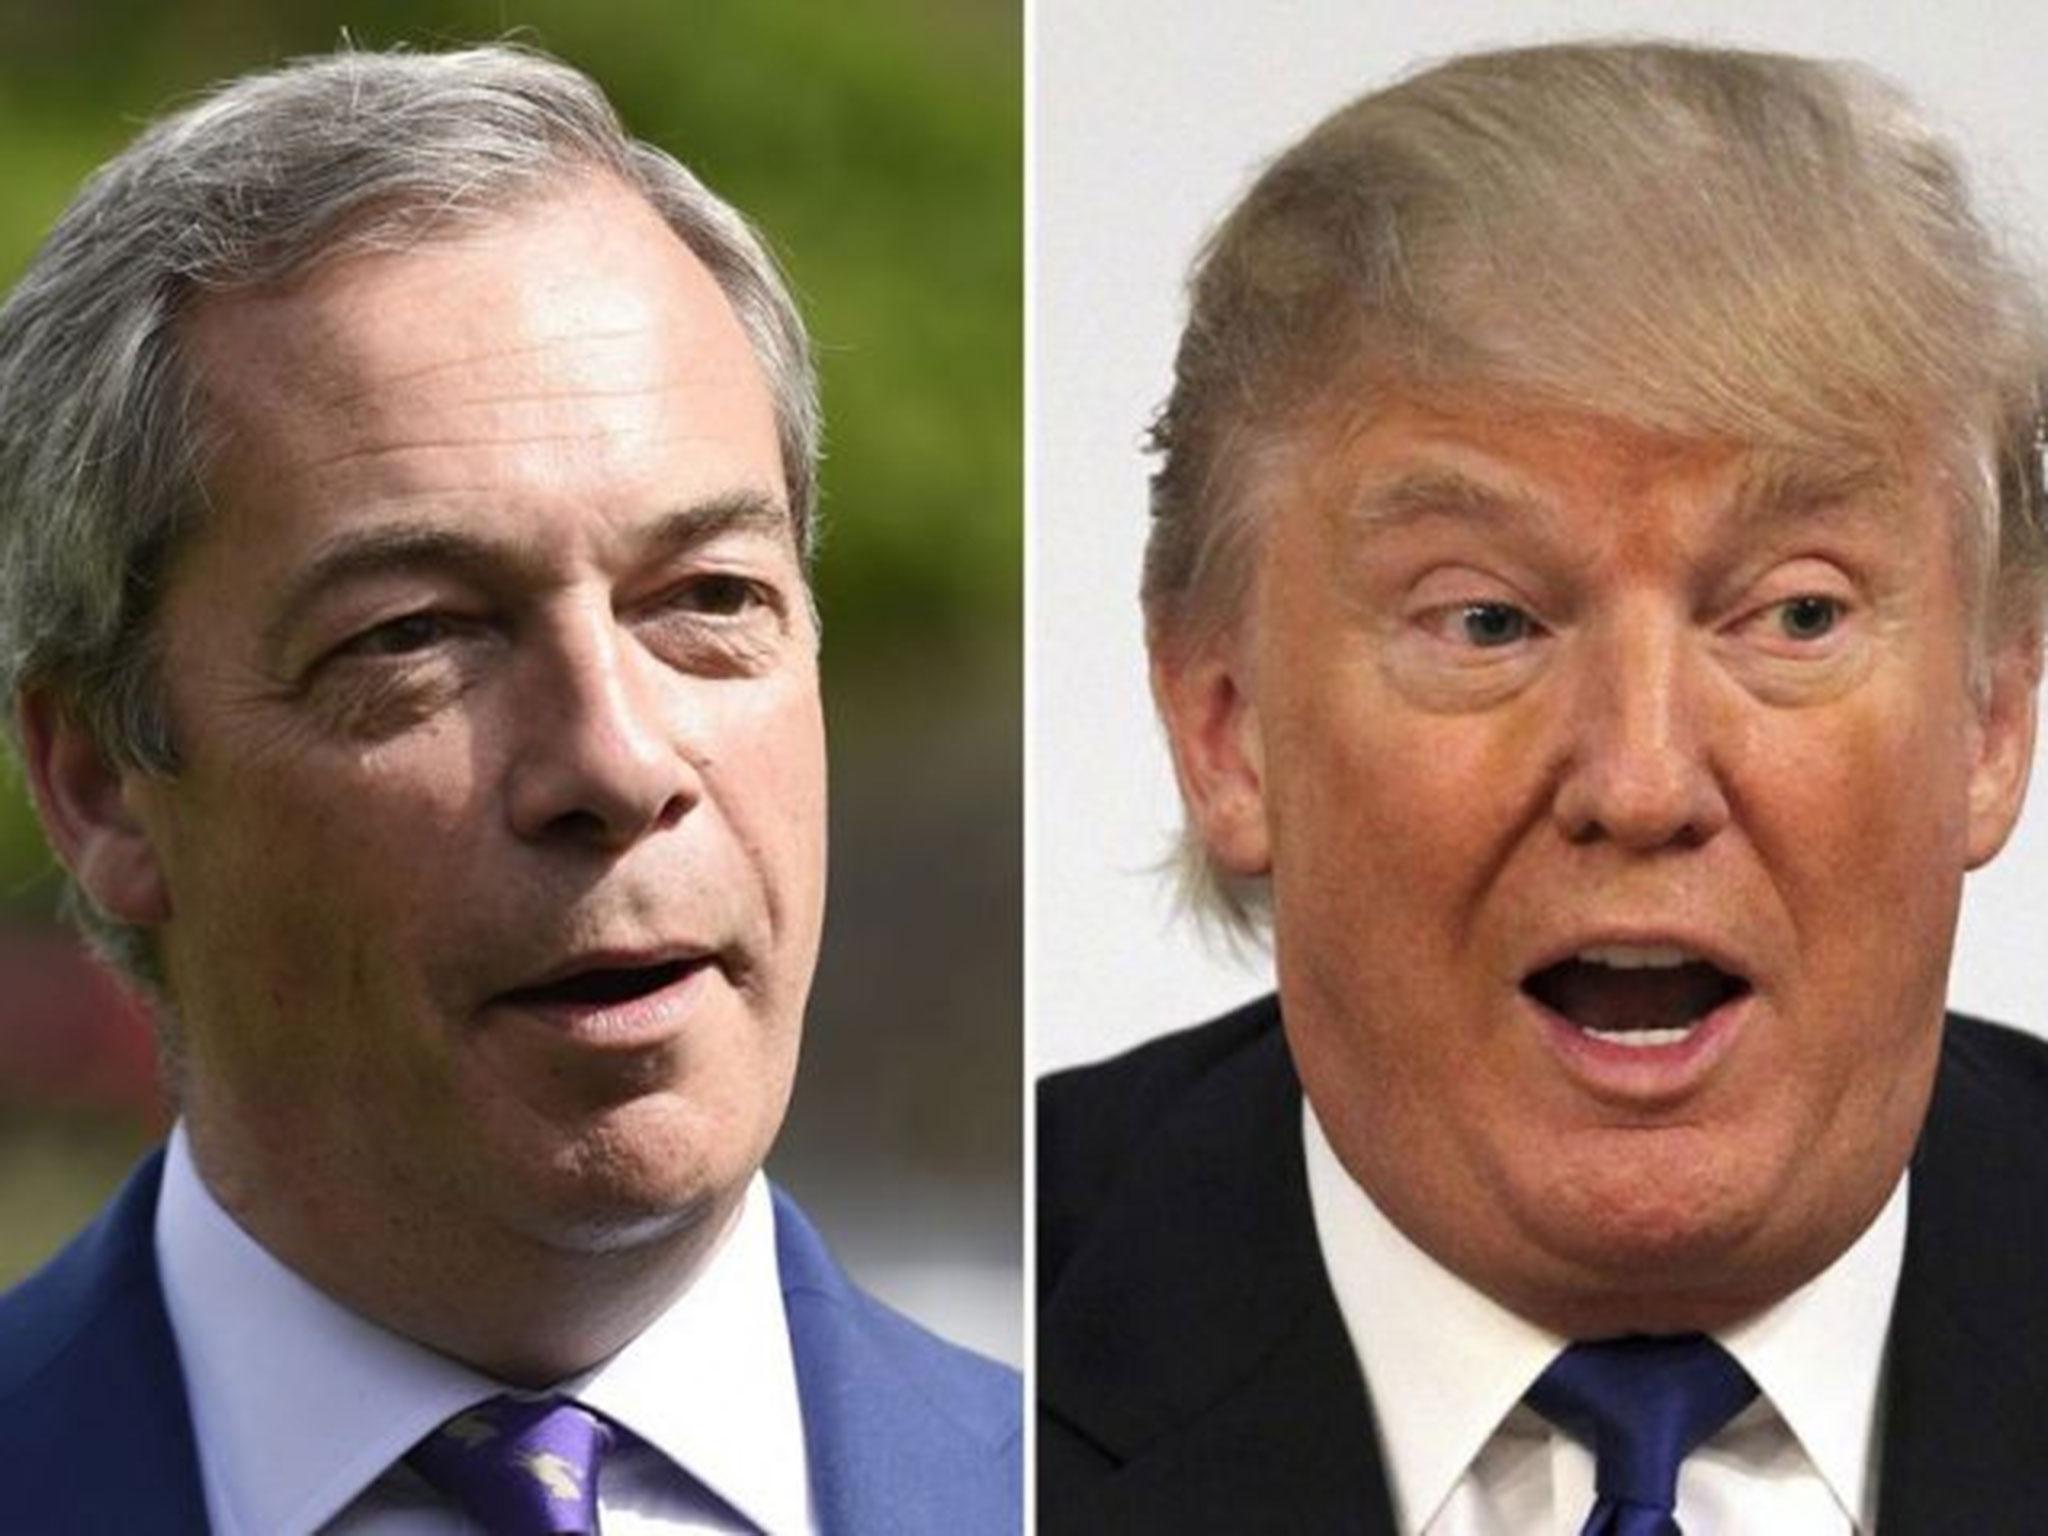 File photos of Nigel Farage and Donald Trump, as the interim Ukip leader wades into the crisis engulfing Mr Trump's US presidential bid, insisting the Republican candidate's obscene remarks about groping women amounted to 'alpha male boasting'